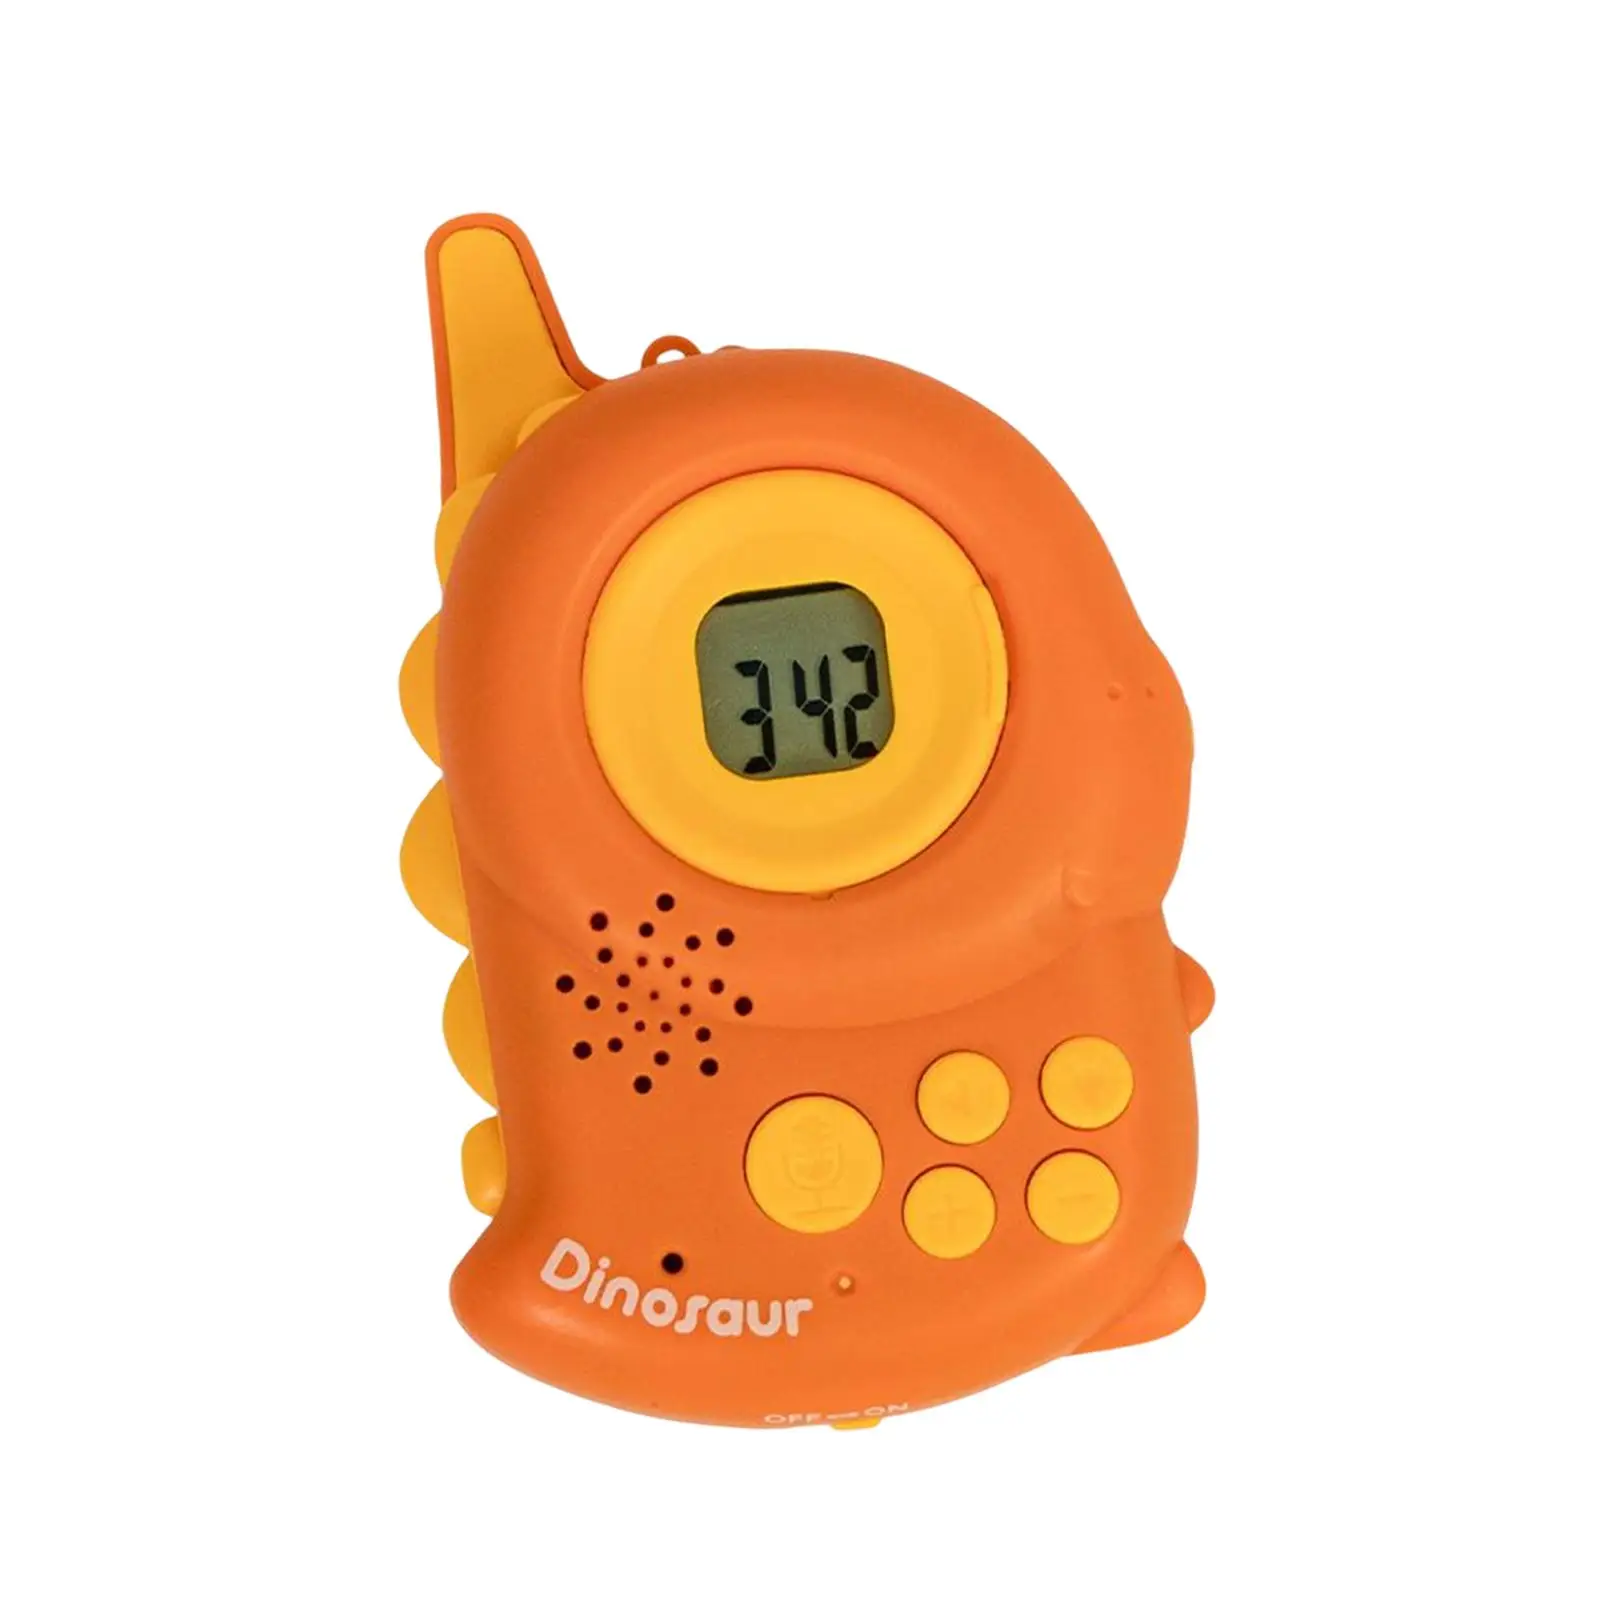 Handheld Walkie Talkies for Kids Lovely for Camping Outside Summer Children Gifts